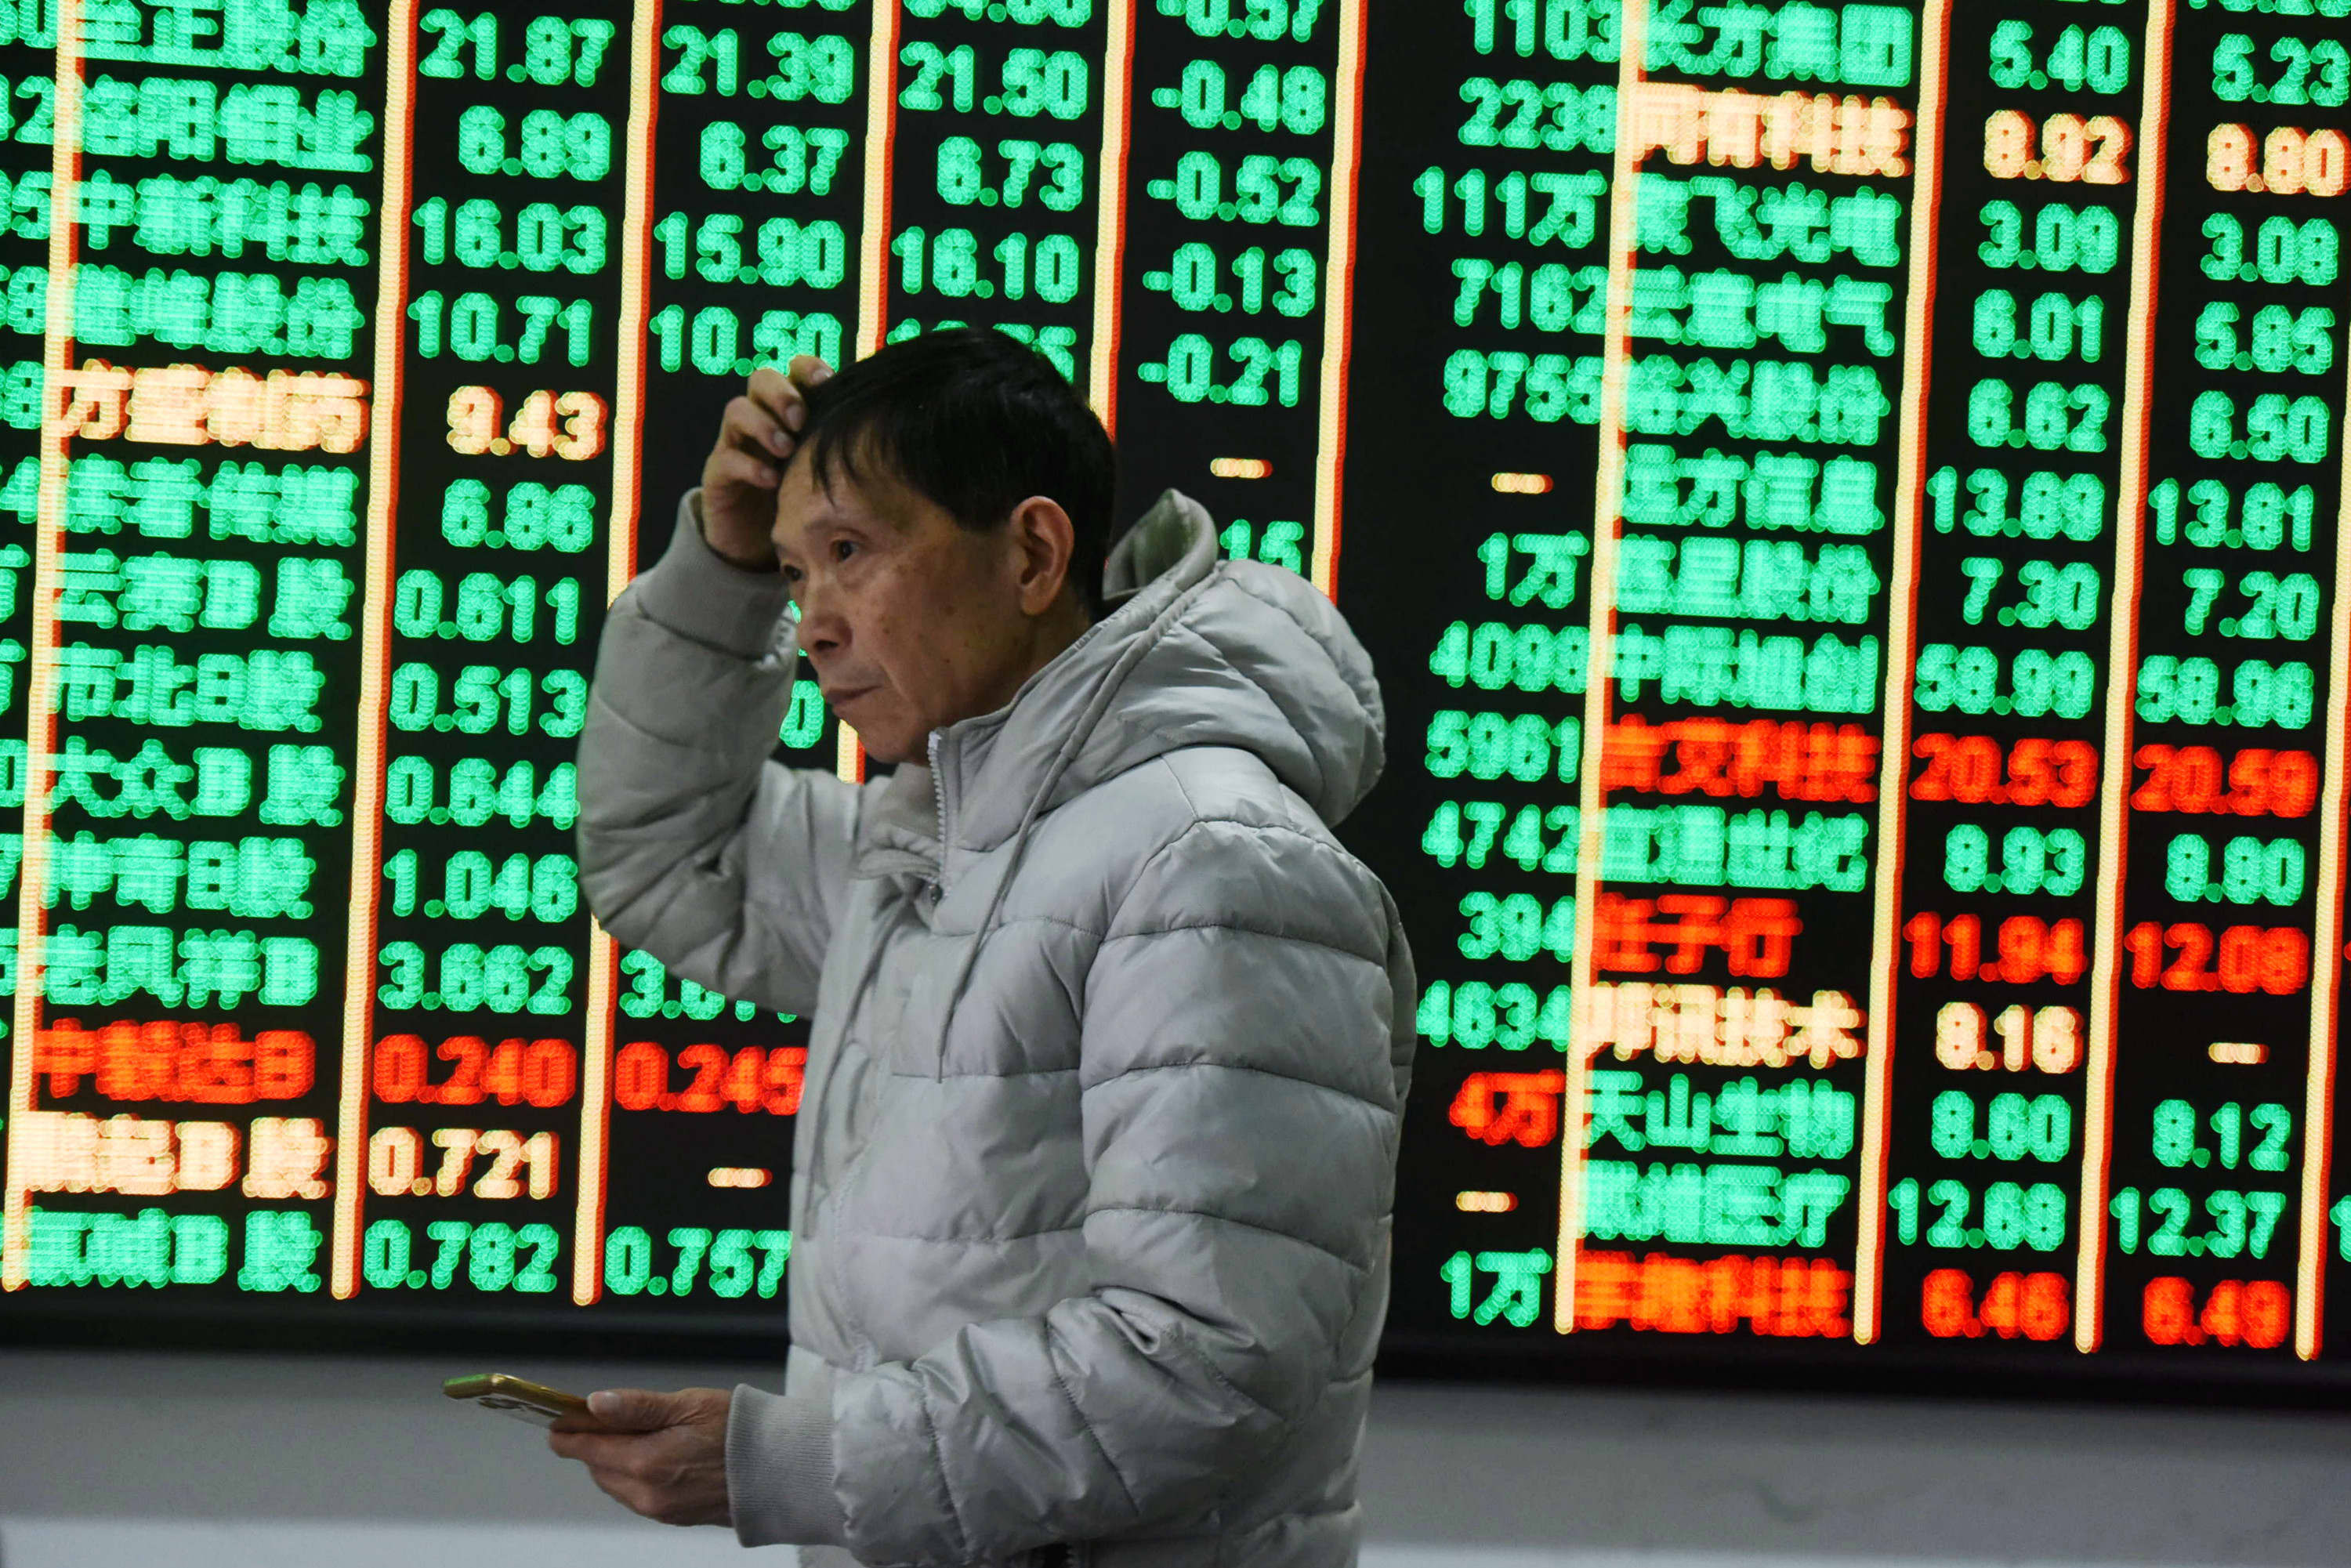 Chinese stocks just saw worst week since October, but a few China ETFs are still beating the market